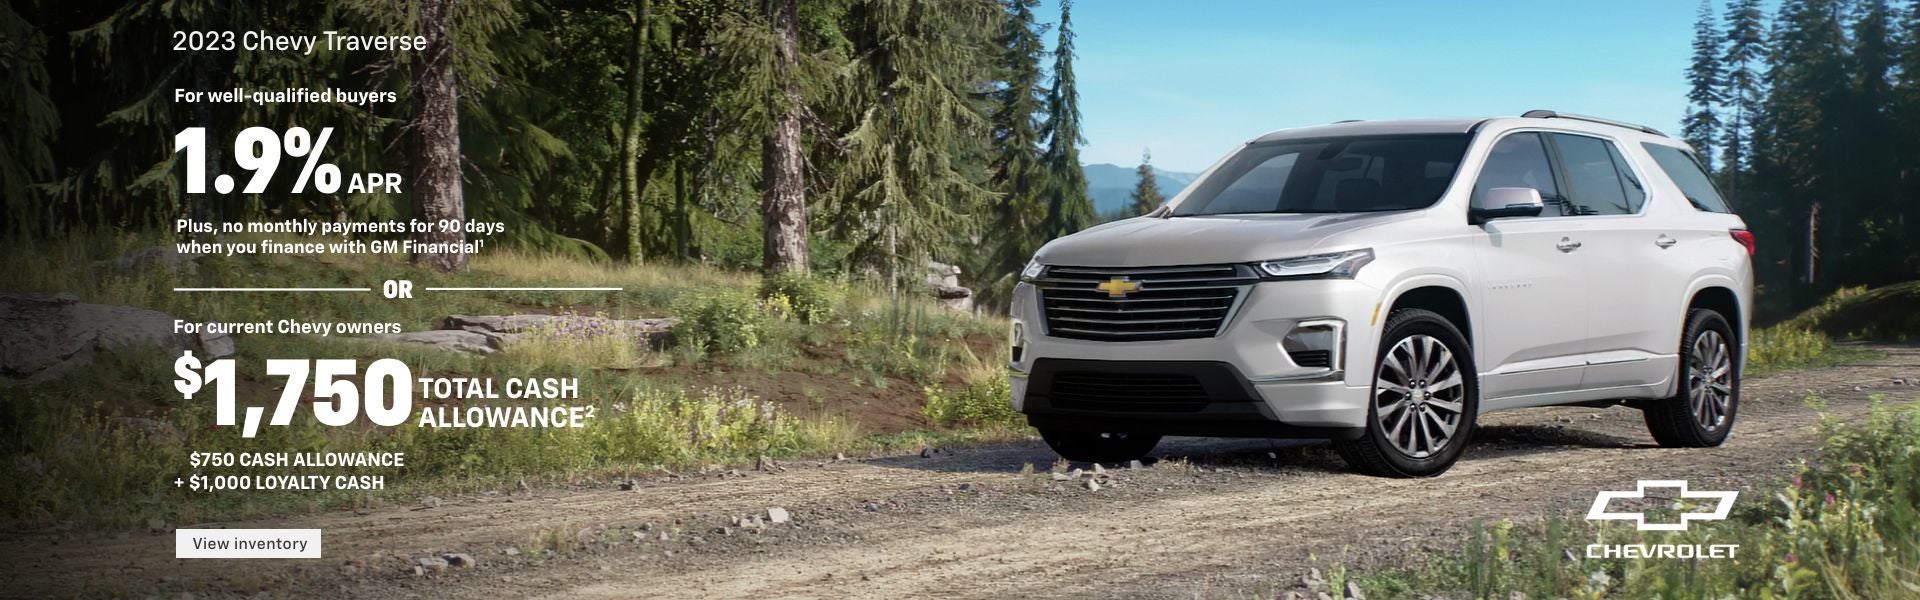 2023 Chevy Traverse. For well-qualified buyers 1.9% APR + no monthly payments for 90 days when yo...